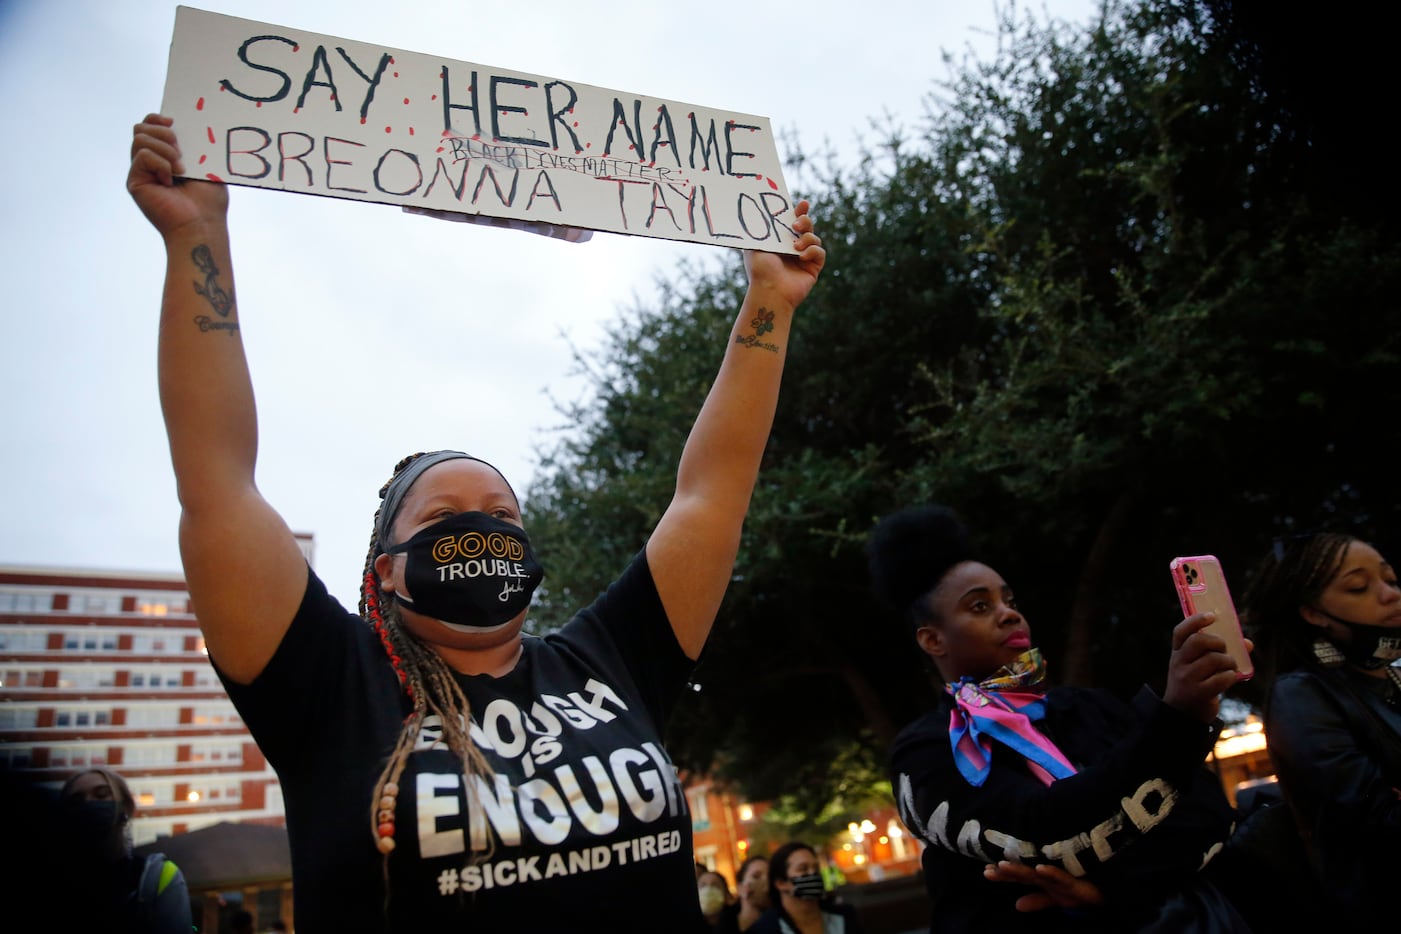 Shena Lee of Dallas proudly held her sign high in support of Breonna Taylor during a Next...